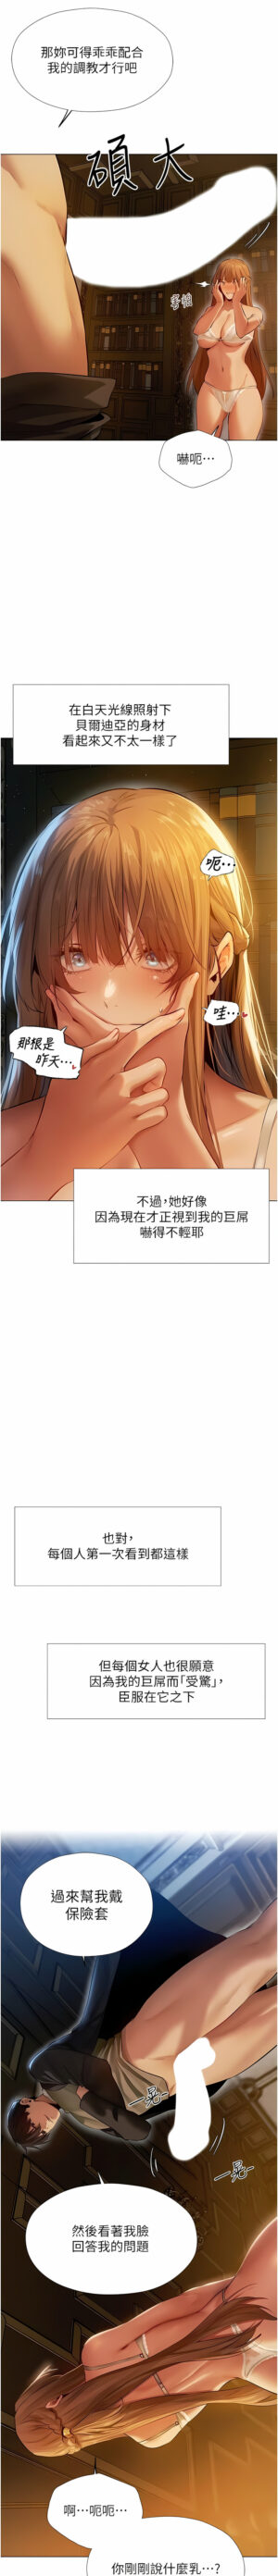 [ERO404 & Yoan & Oh gok Jeon do sa] Milf Hunting in Another World | 人妻猎人 | 人妻獵人 (1-10) [Chinese] [Ongoing]